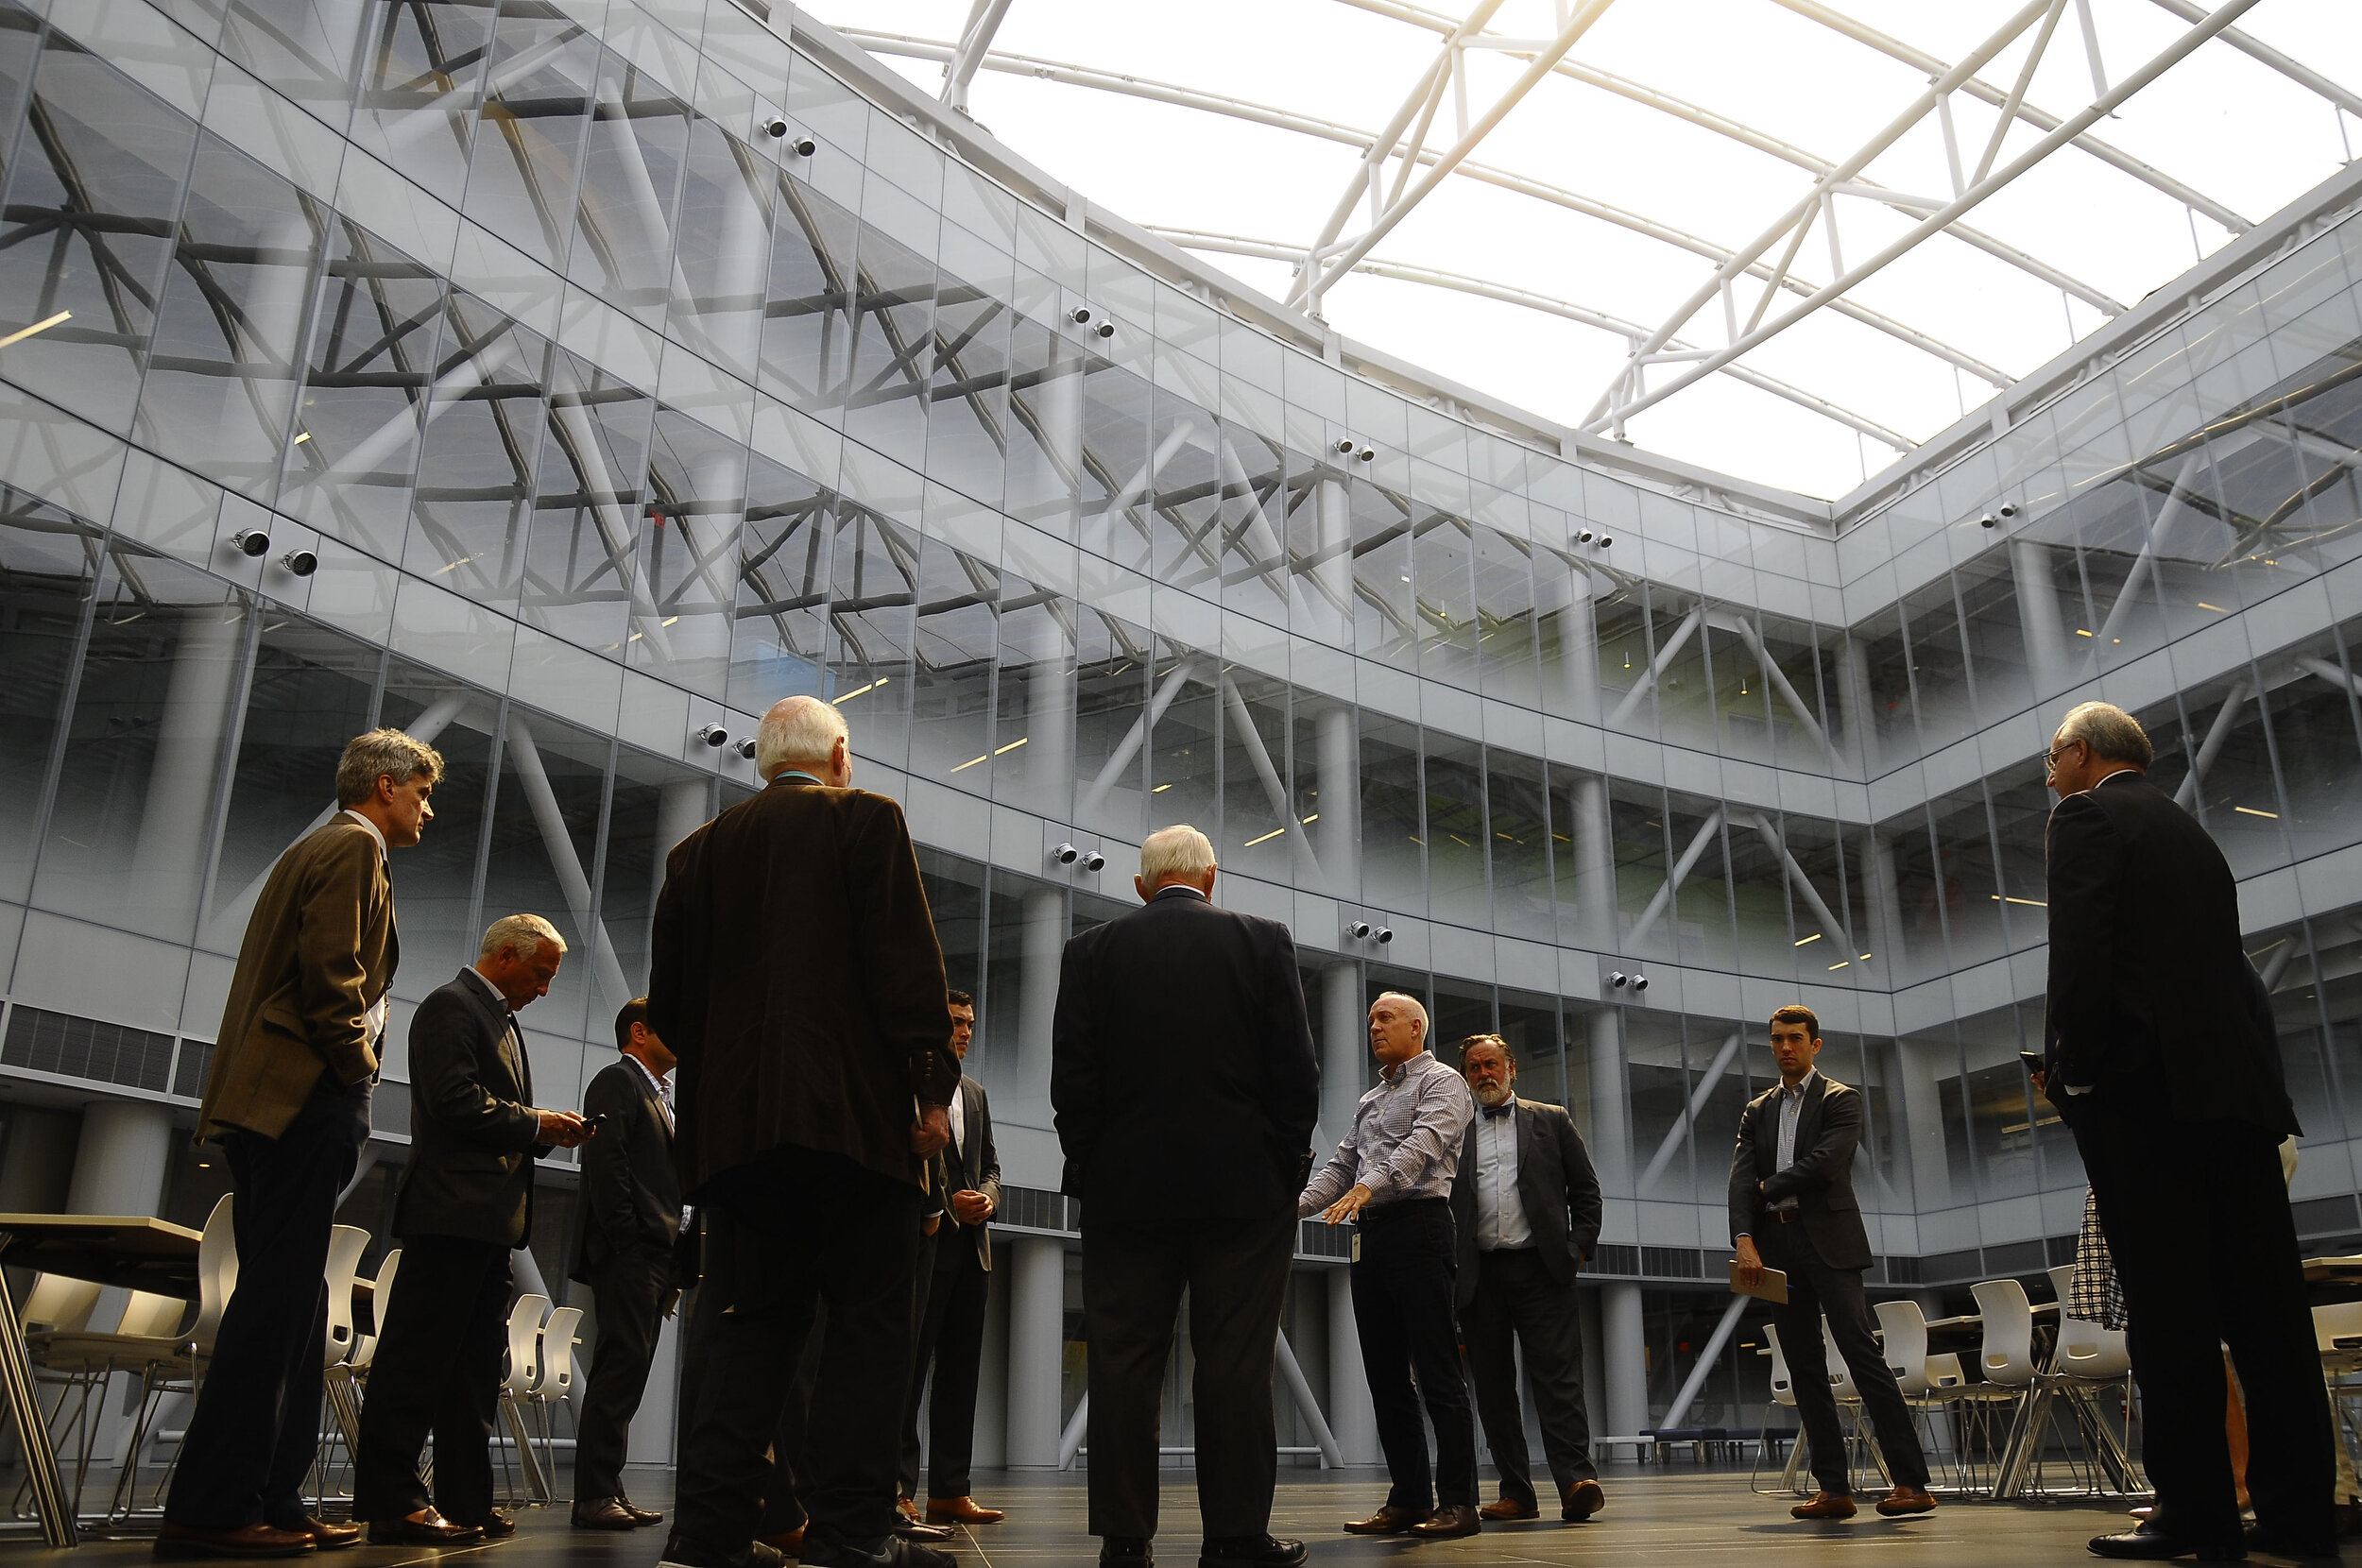  Michael Fancher, center, Director of New York State Center for Advanced Technology in Nanoelectrics, shows the Zen Building to the Economic Development tour hosted by Saratoga County Prosperity Partnership at SUNY Poly Technical Institute on Monday,